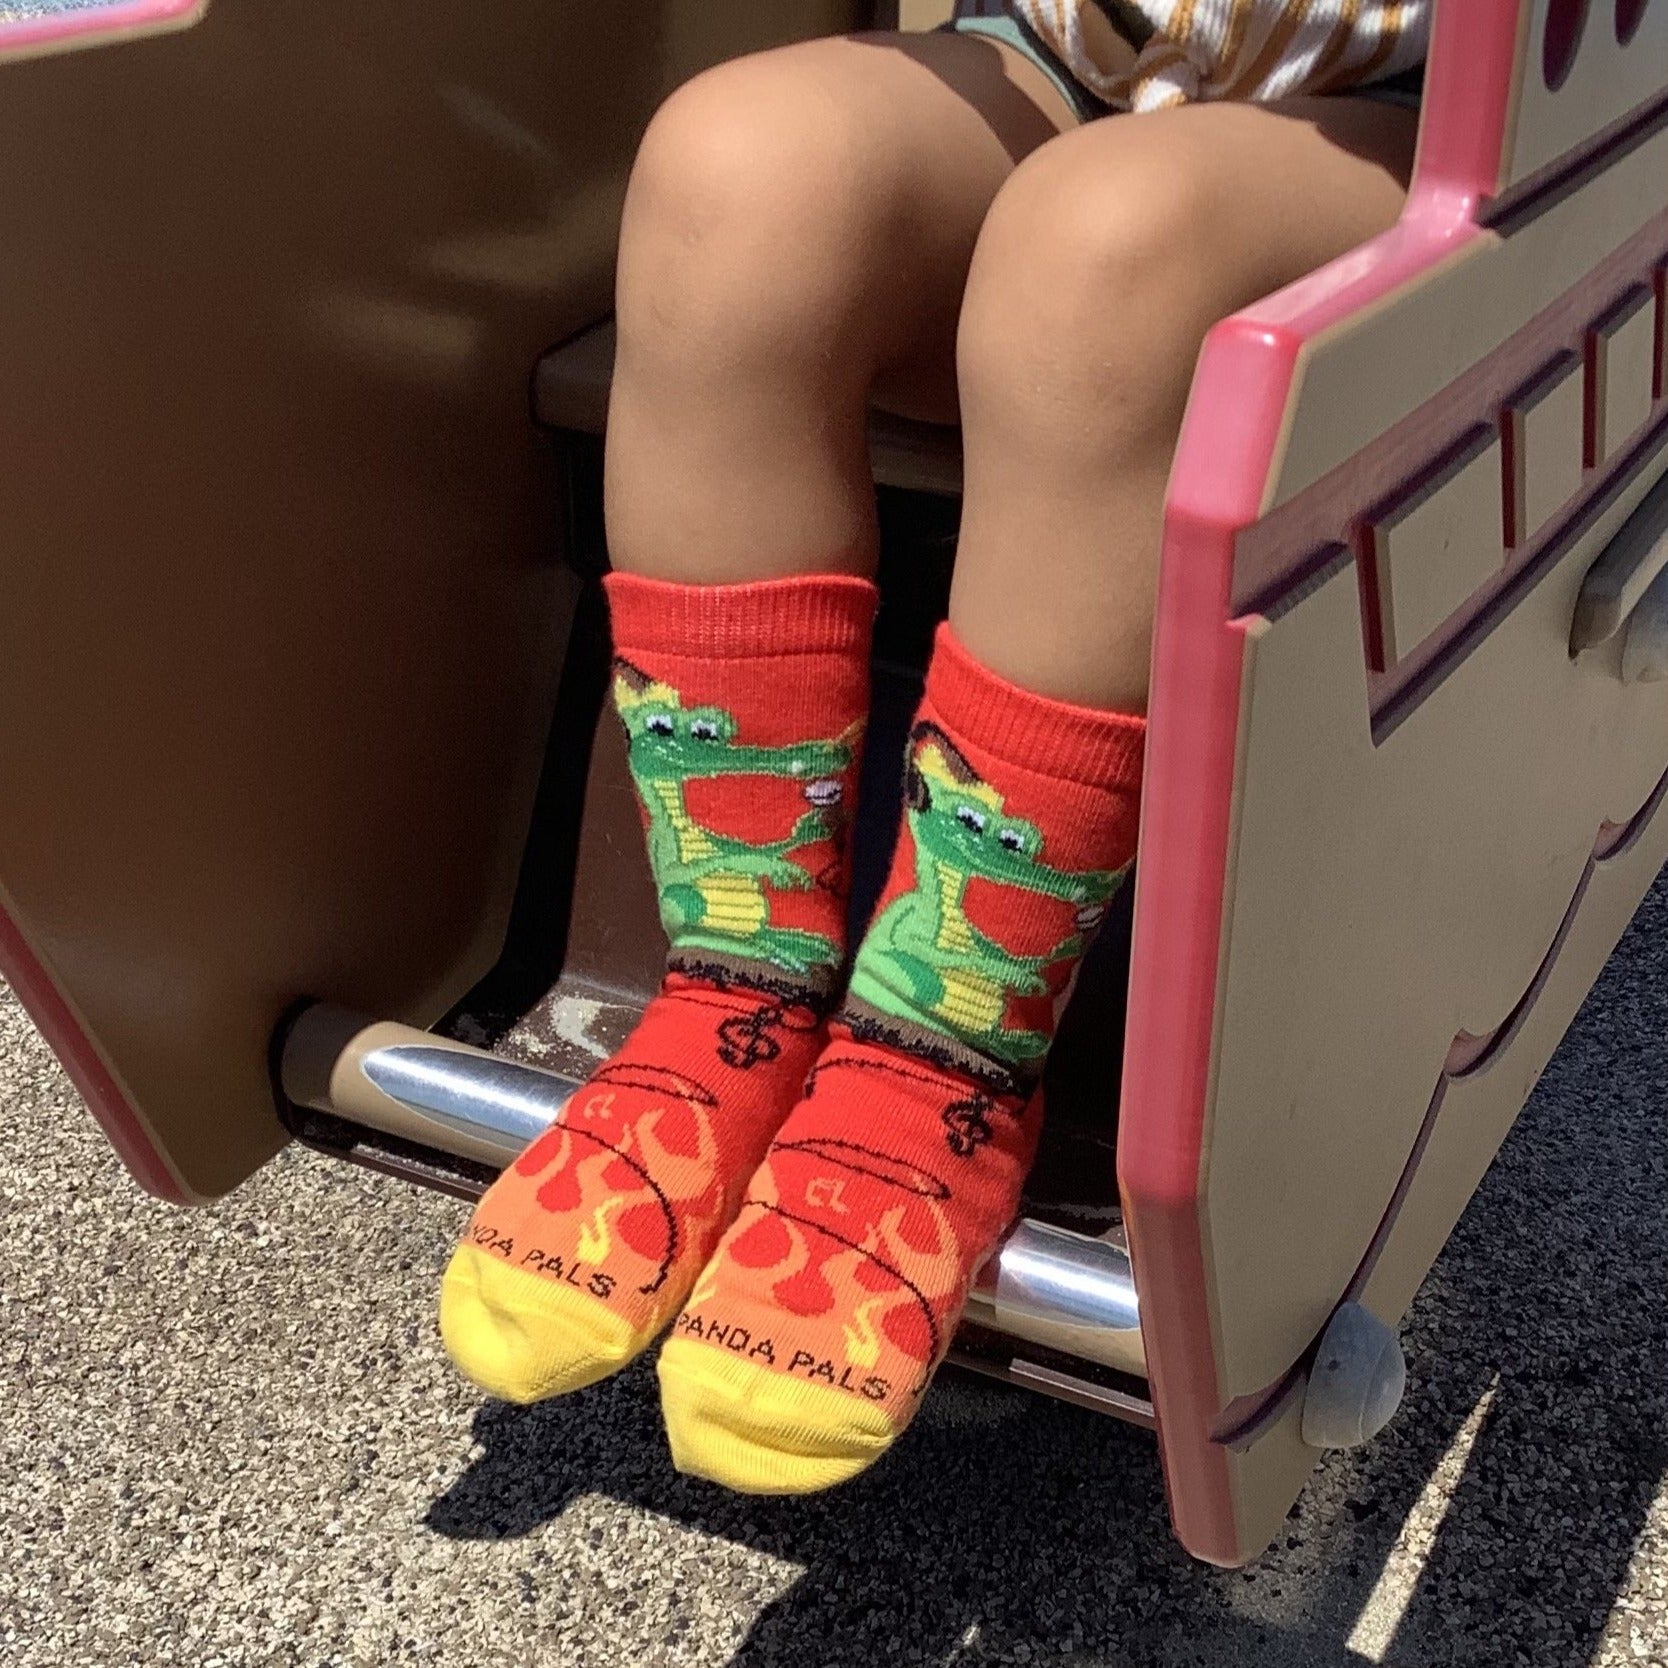 Music Dragon on Fire Socks (Ages 3-7) from the Sock Panda